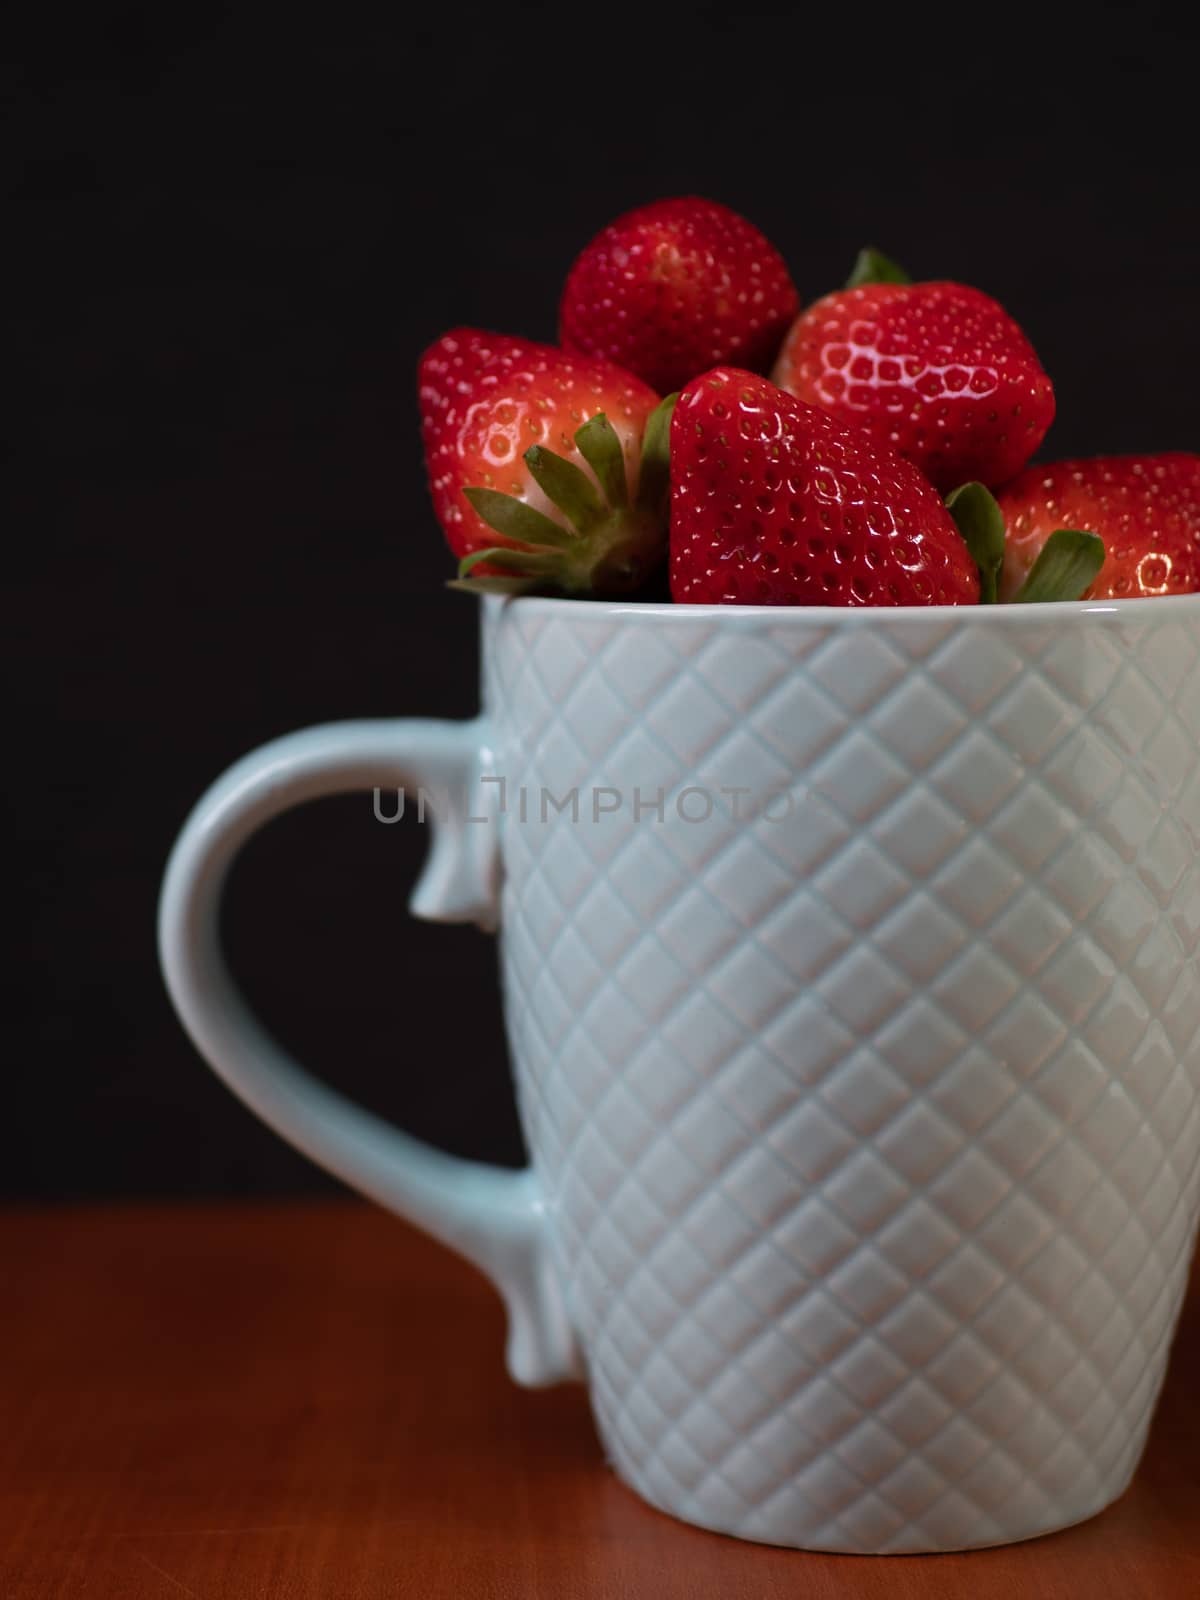 strawberries in a green ceramic cup